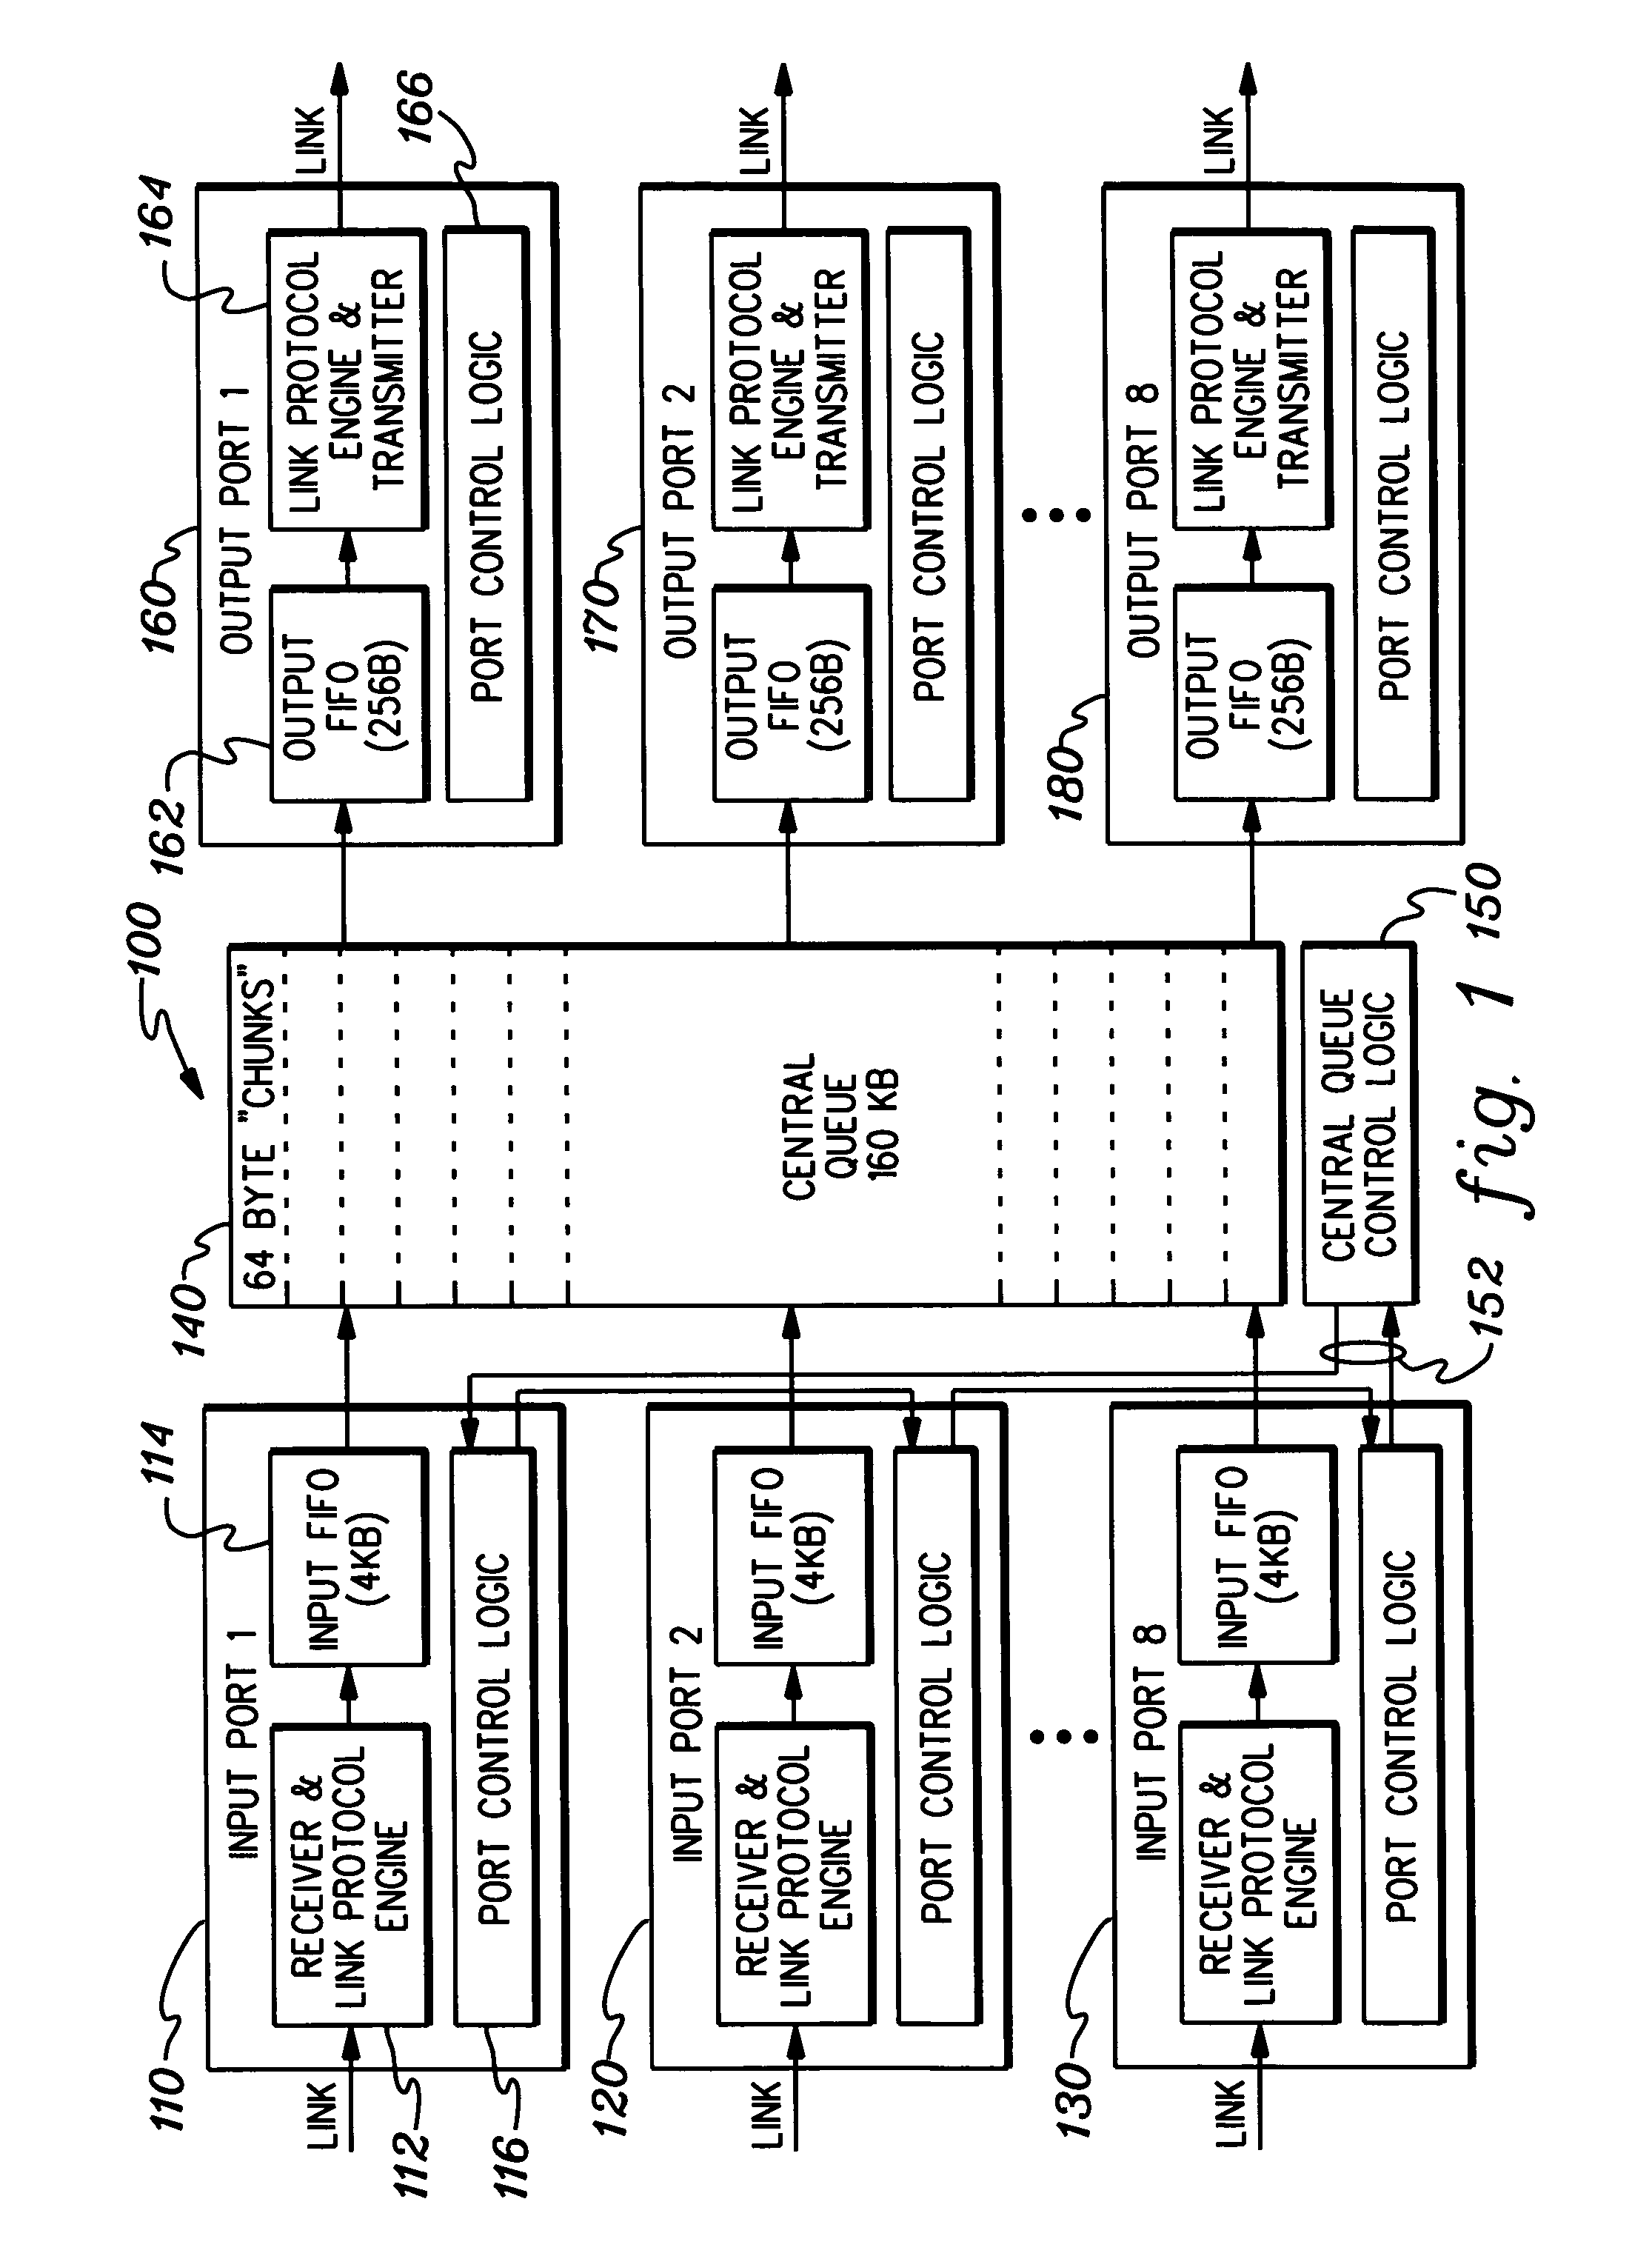 Method, system and program product for actively managing central queue buffer allocation using a backpressure mechanism